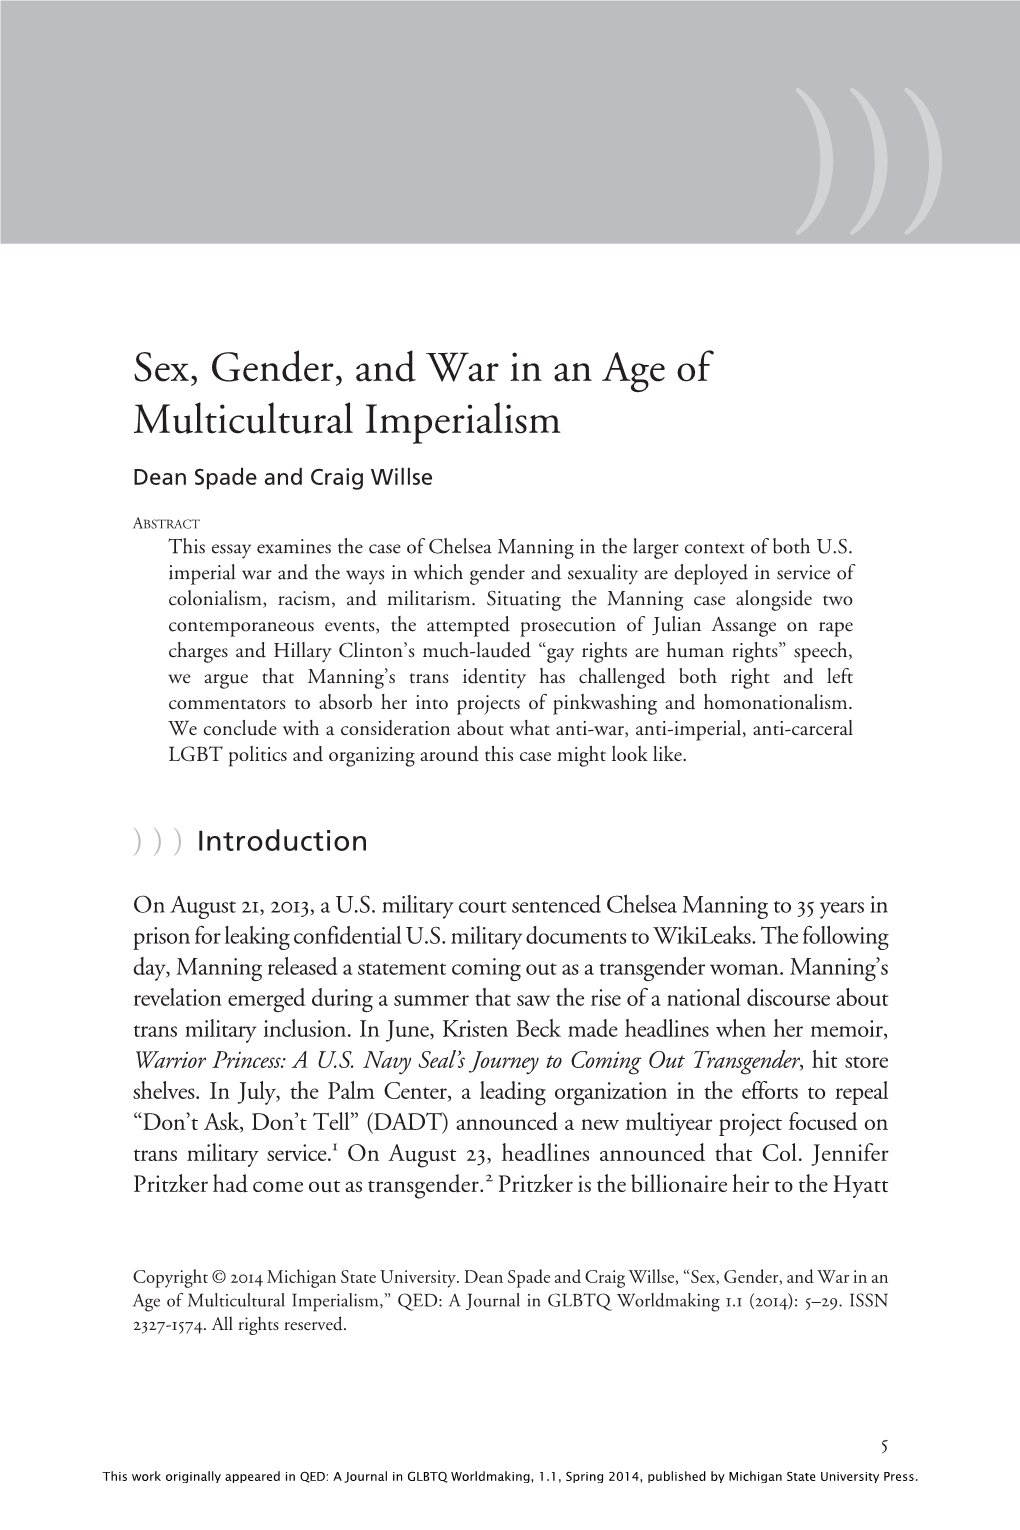 Sex, Gender, and War in an Age of Multicultural Imperialism